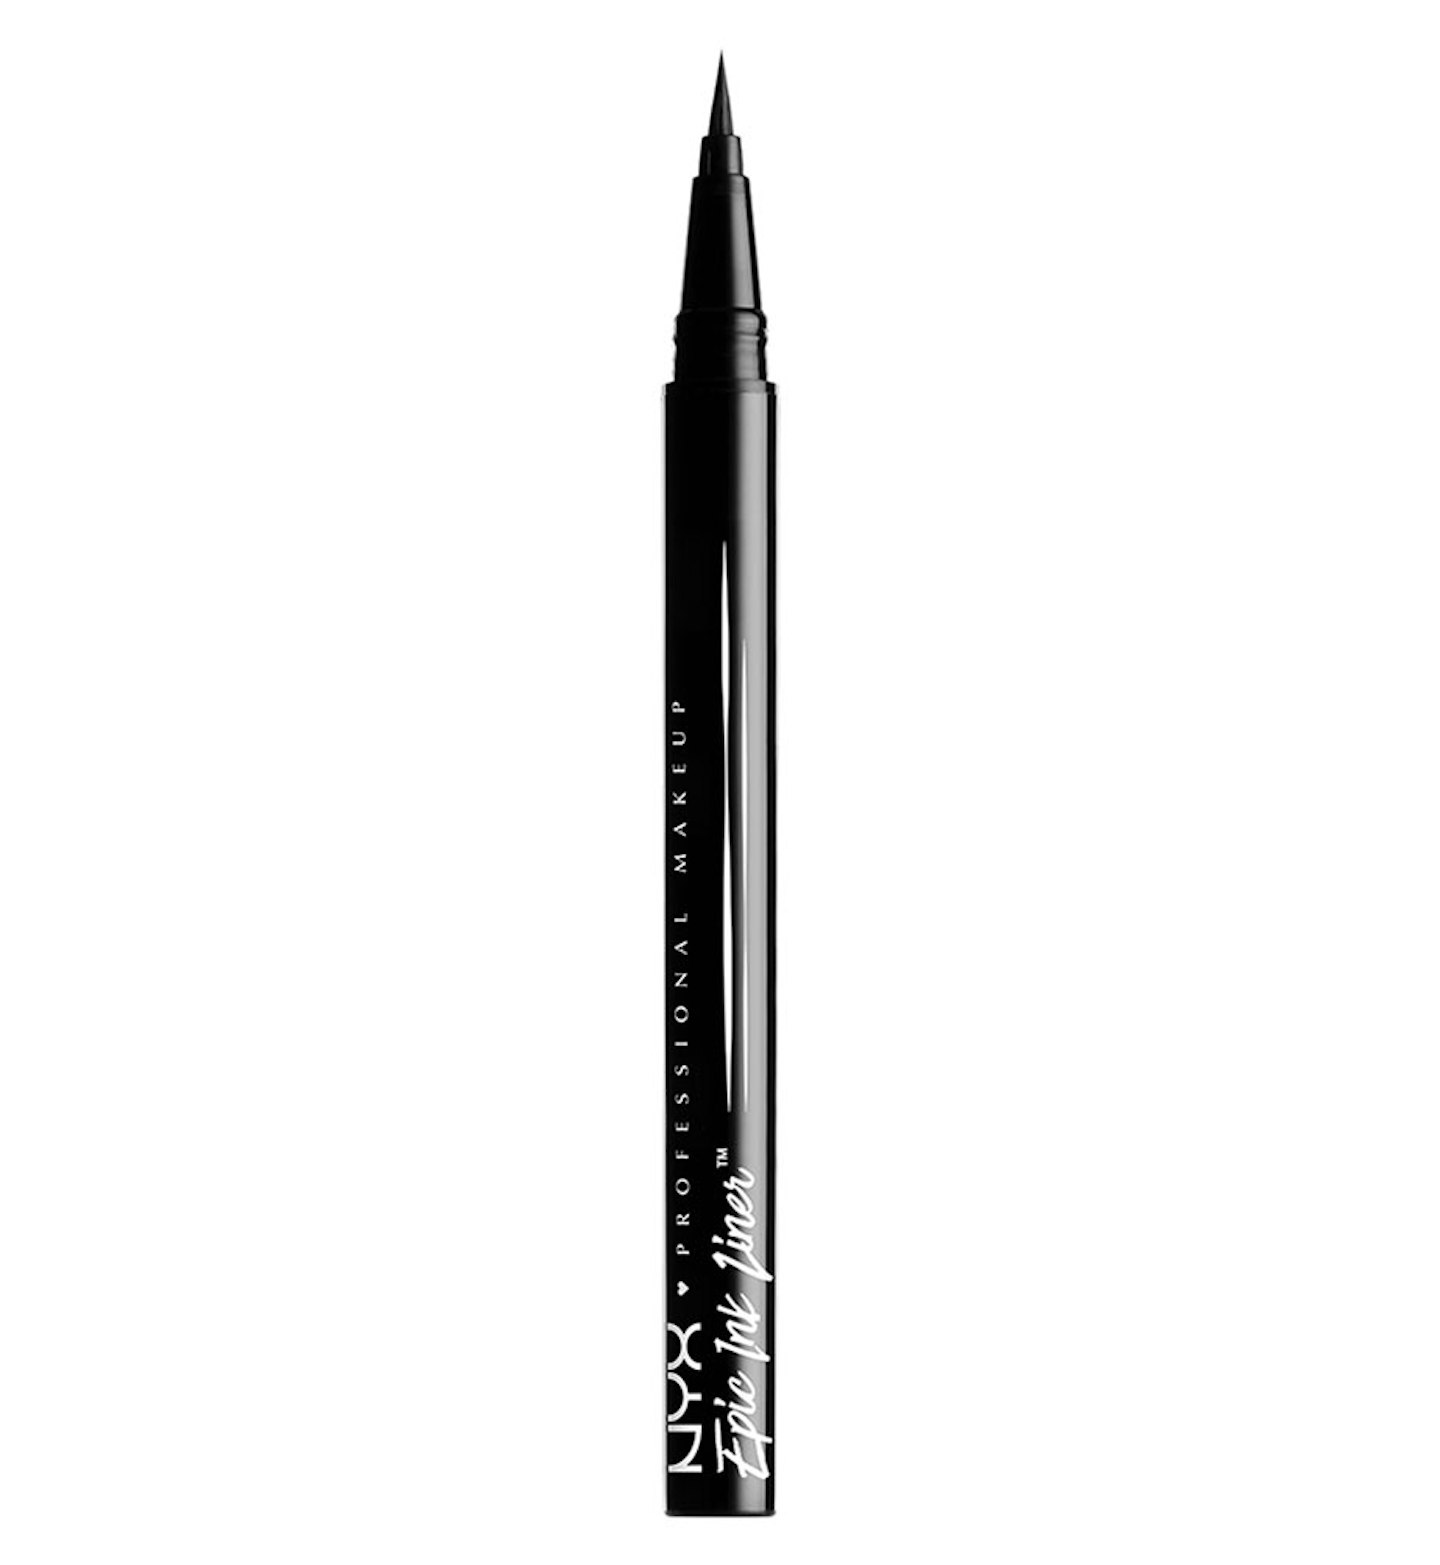 NYX Professional Makeup Epic Ink Liner, £9.99 from Boots